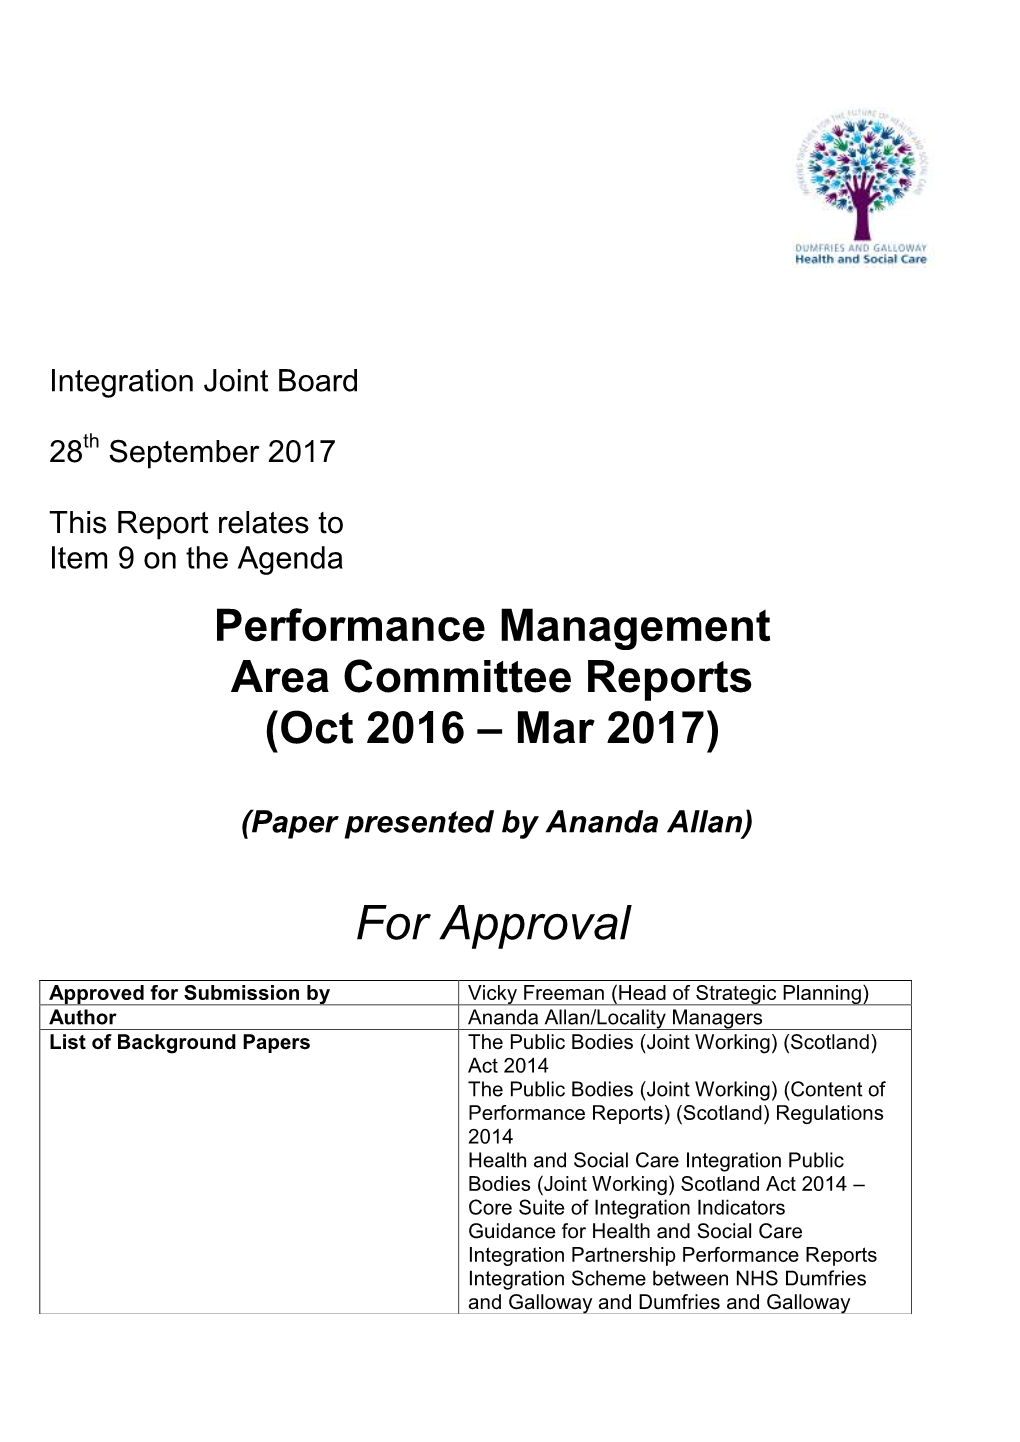 Performance Management Area Committee Reports (Oct 2016 – Mar 2017)